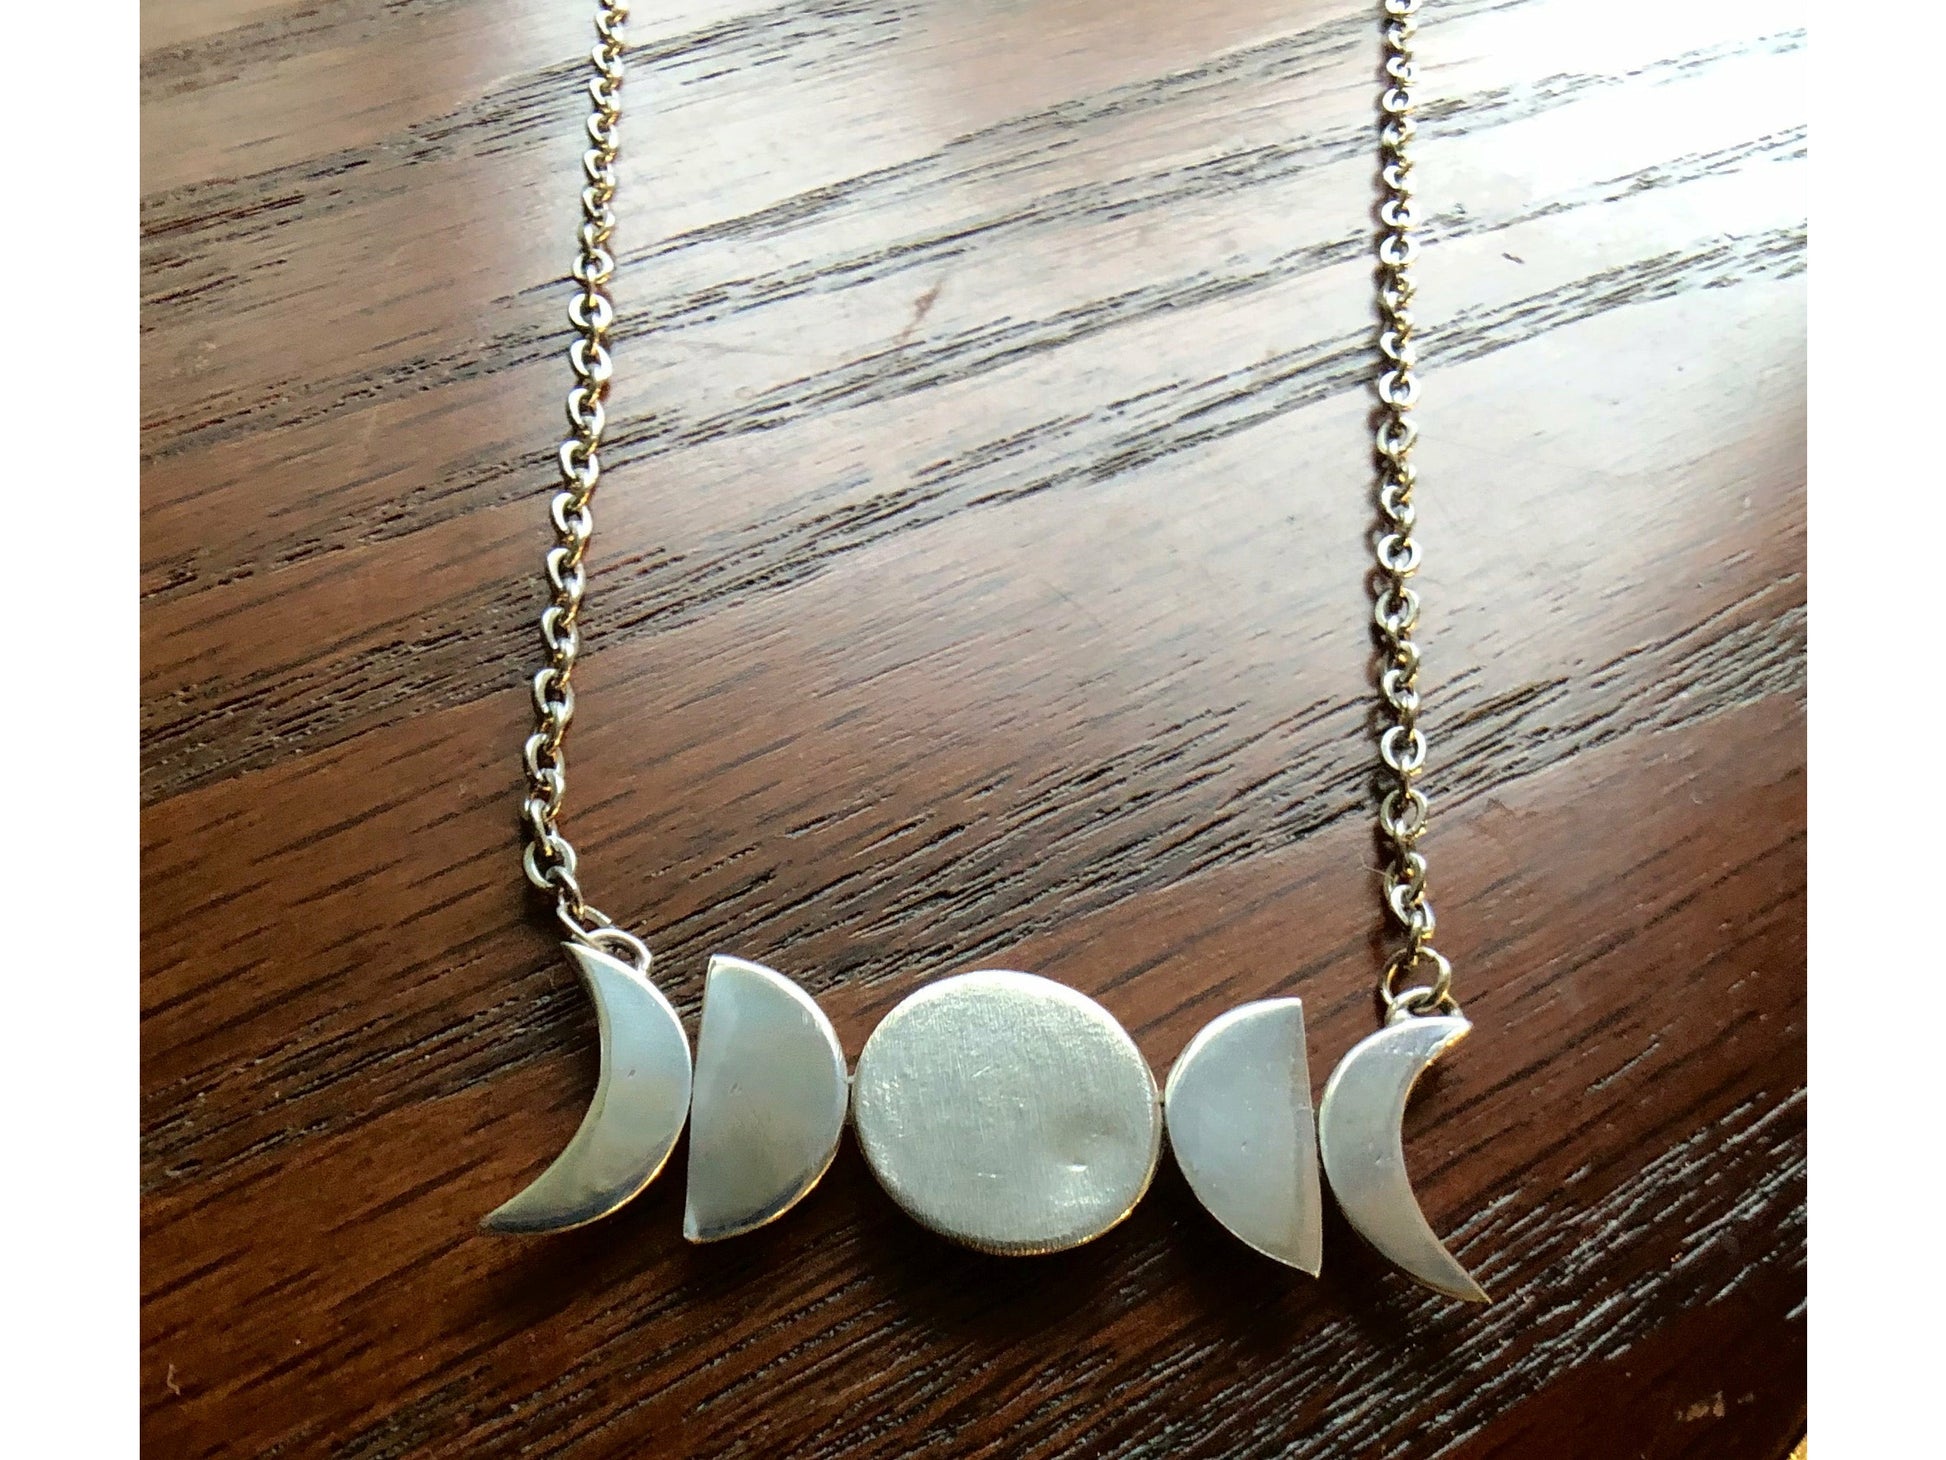 Moon phase necklace – N.F.J